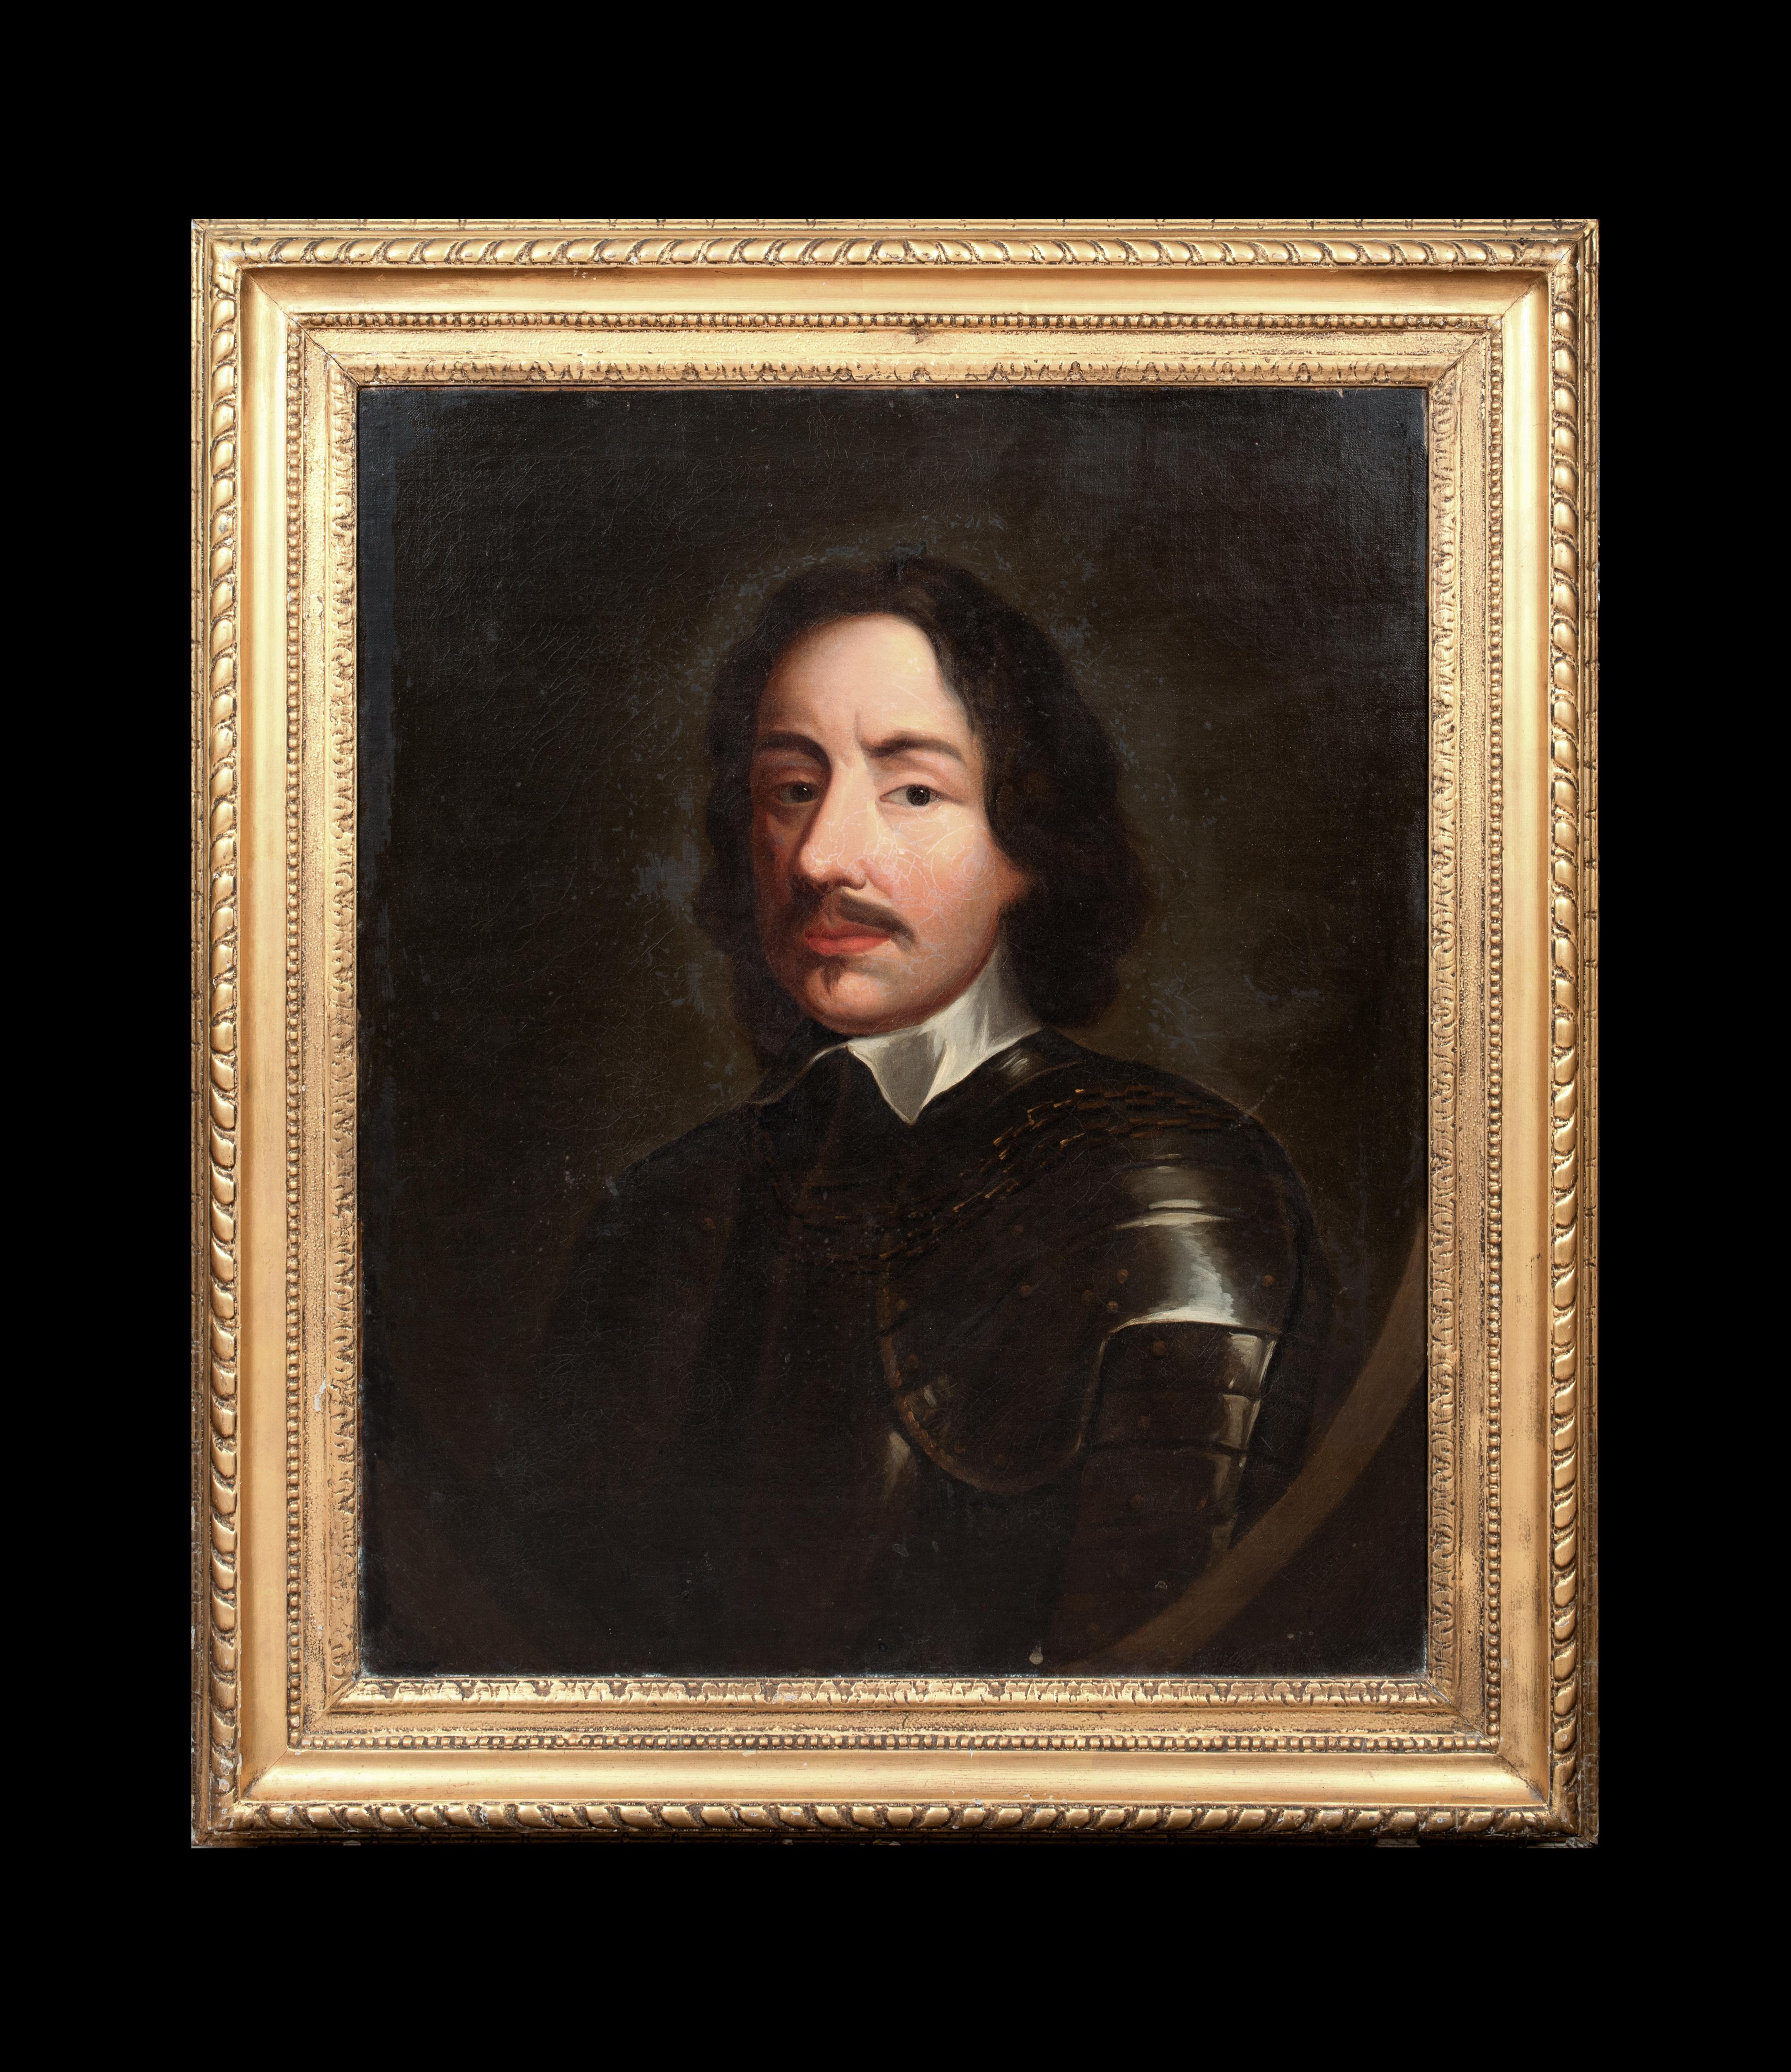 Portrait of General Henry Ireton (1611-1651) Son In Law to Oliver Cromwell - Painting by Robert Walker